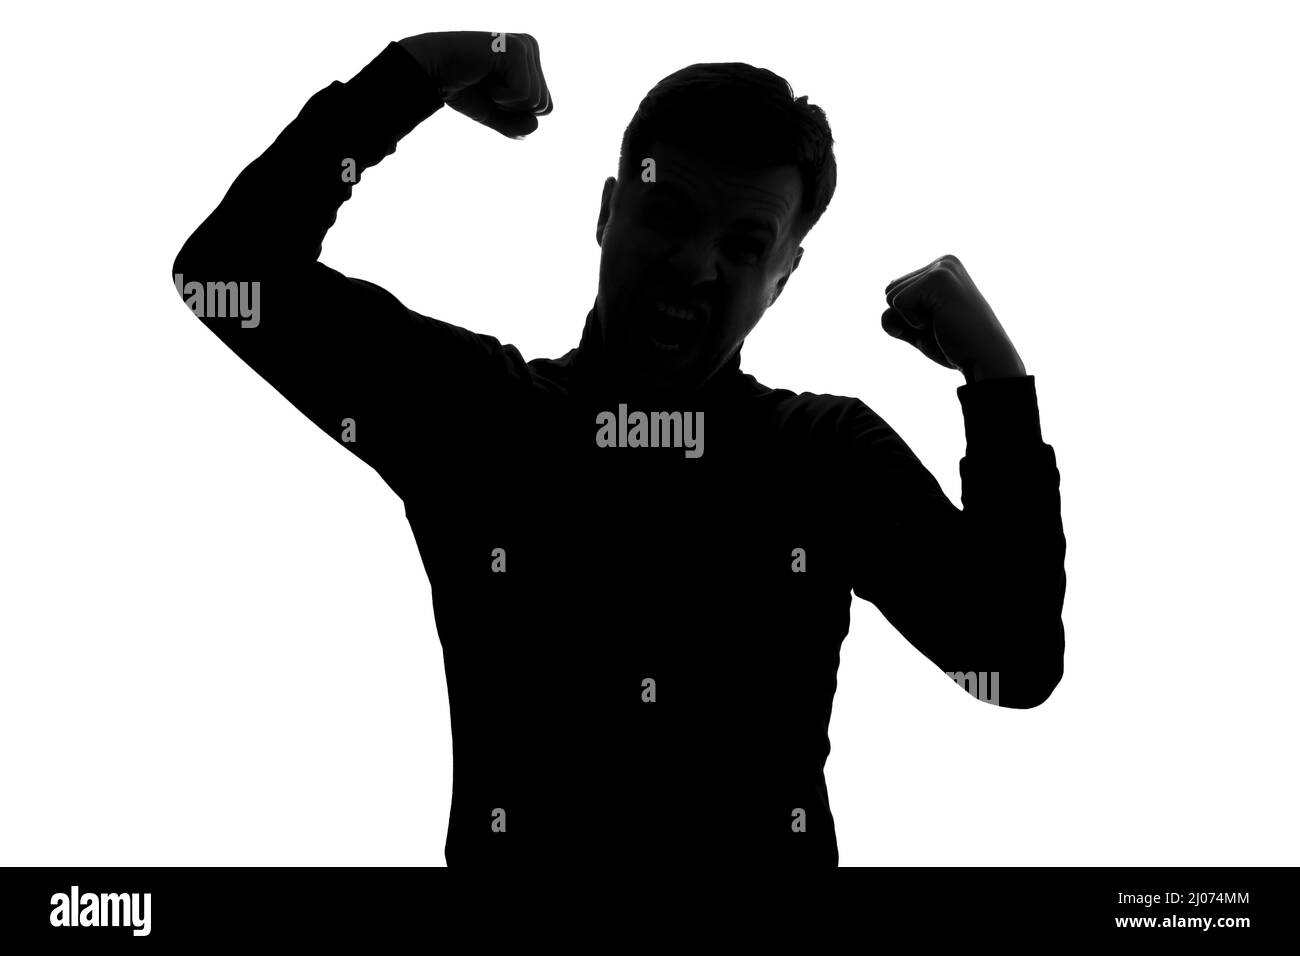 Man showing arms muscles smiling proud. Fitness concept. silhouette view Stock Photo